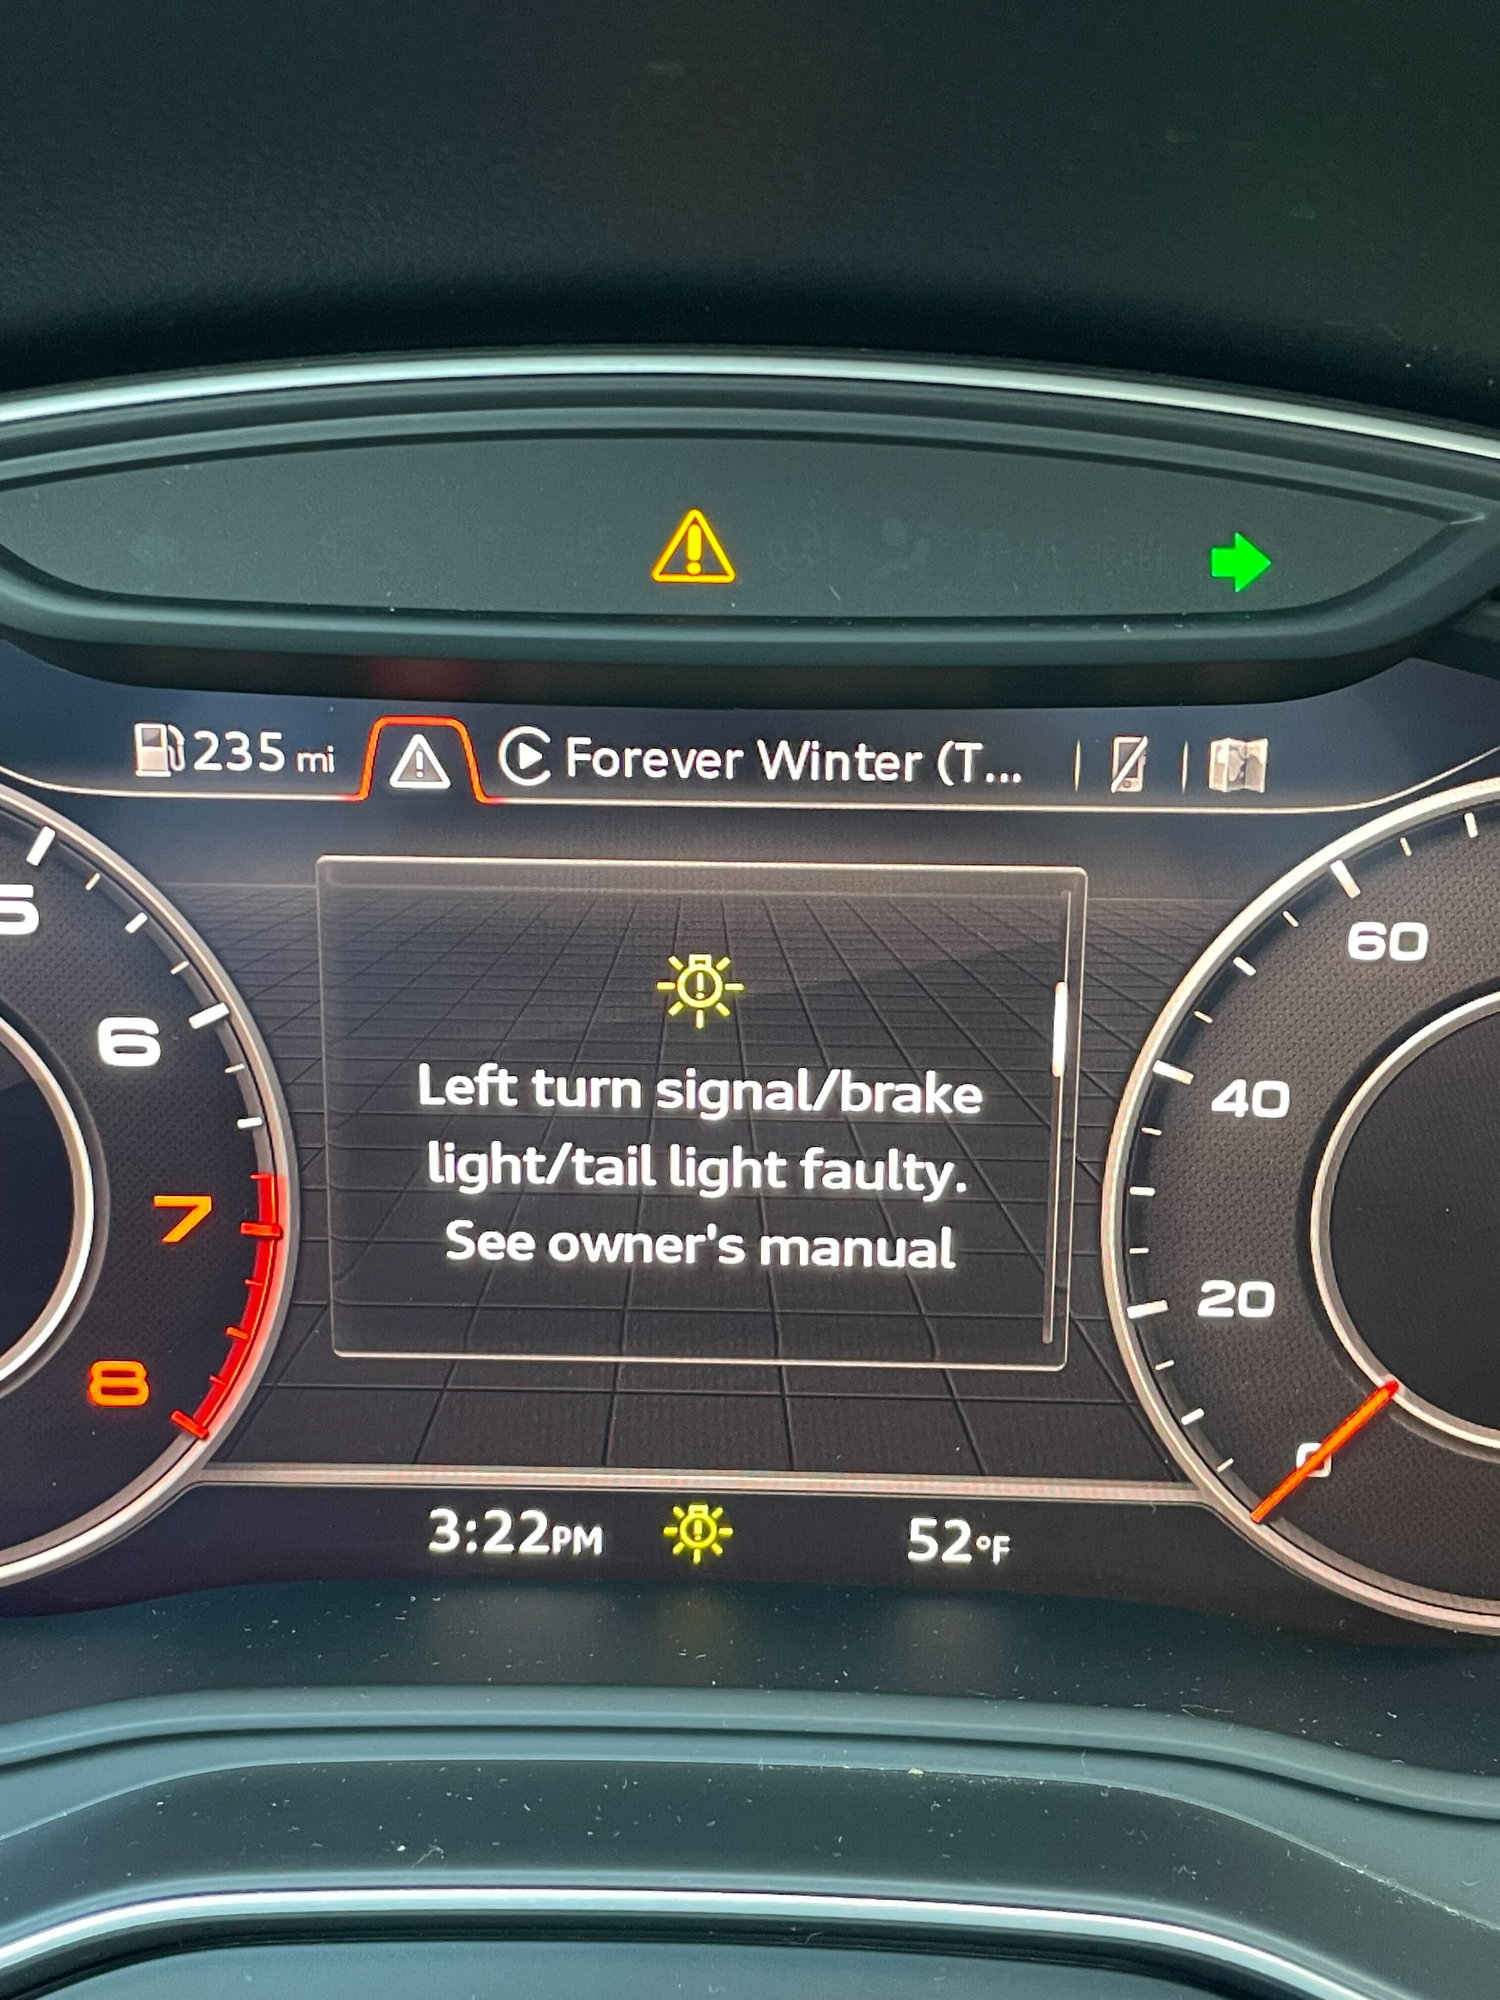 2018 Q5 - Both tailgate light stopped working - AudiWorld Forums